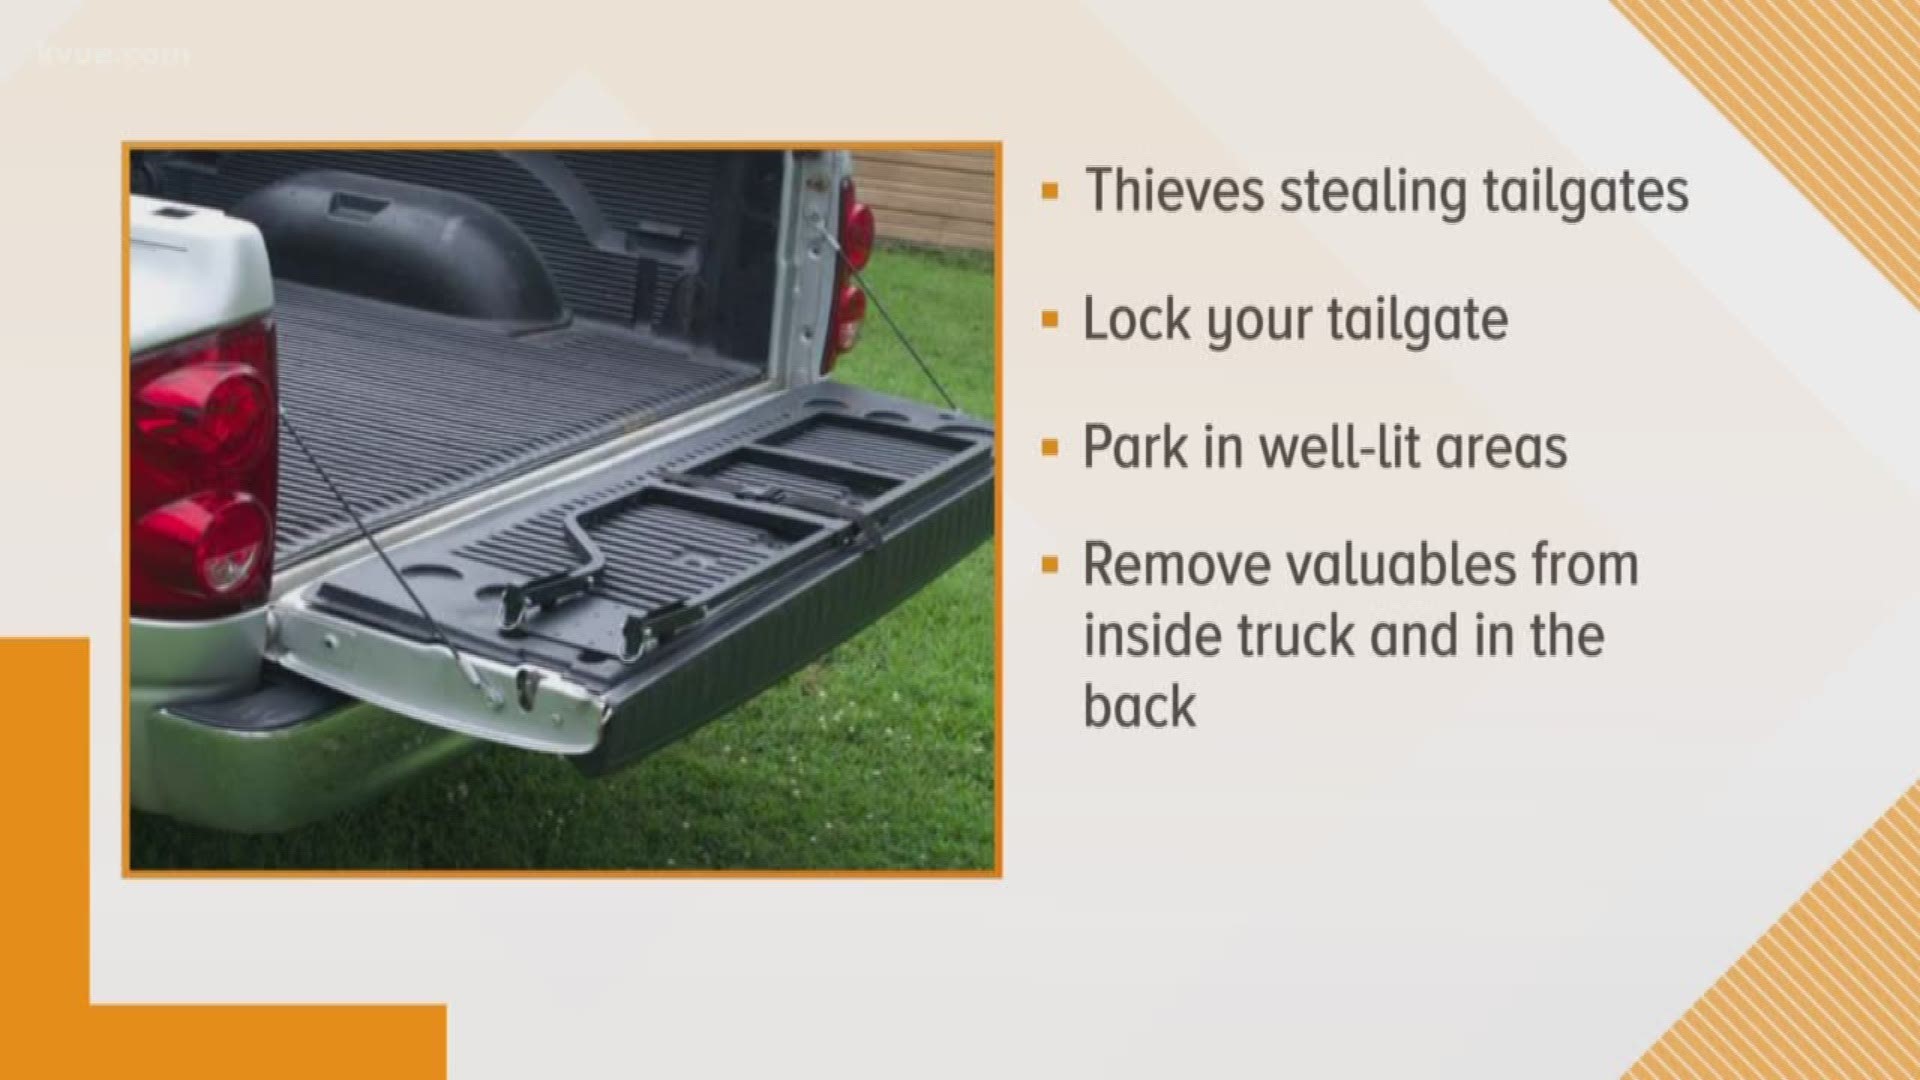 Thieves are targeting truck tailgates in the Austin area. In December, two people were arrested for stealing five tailgates in New Braunfels.